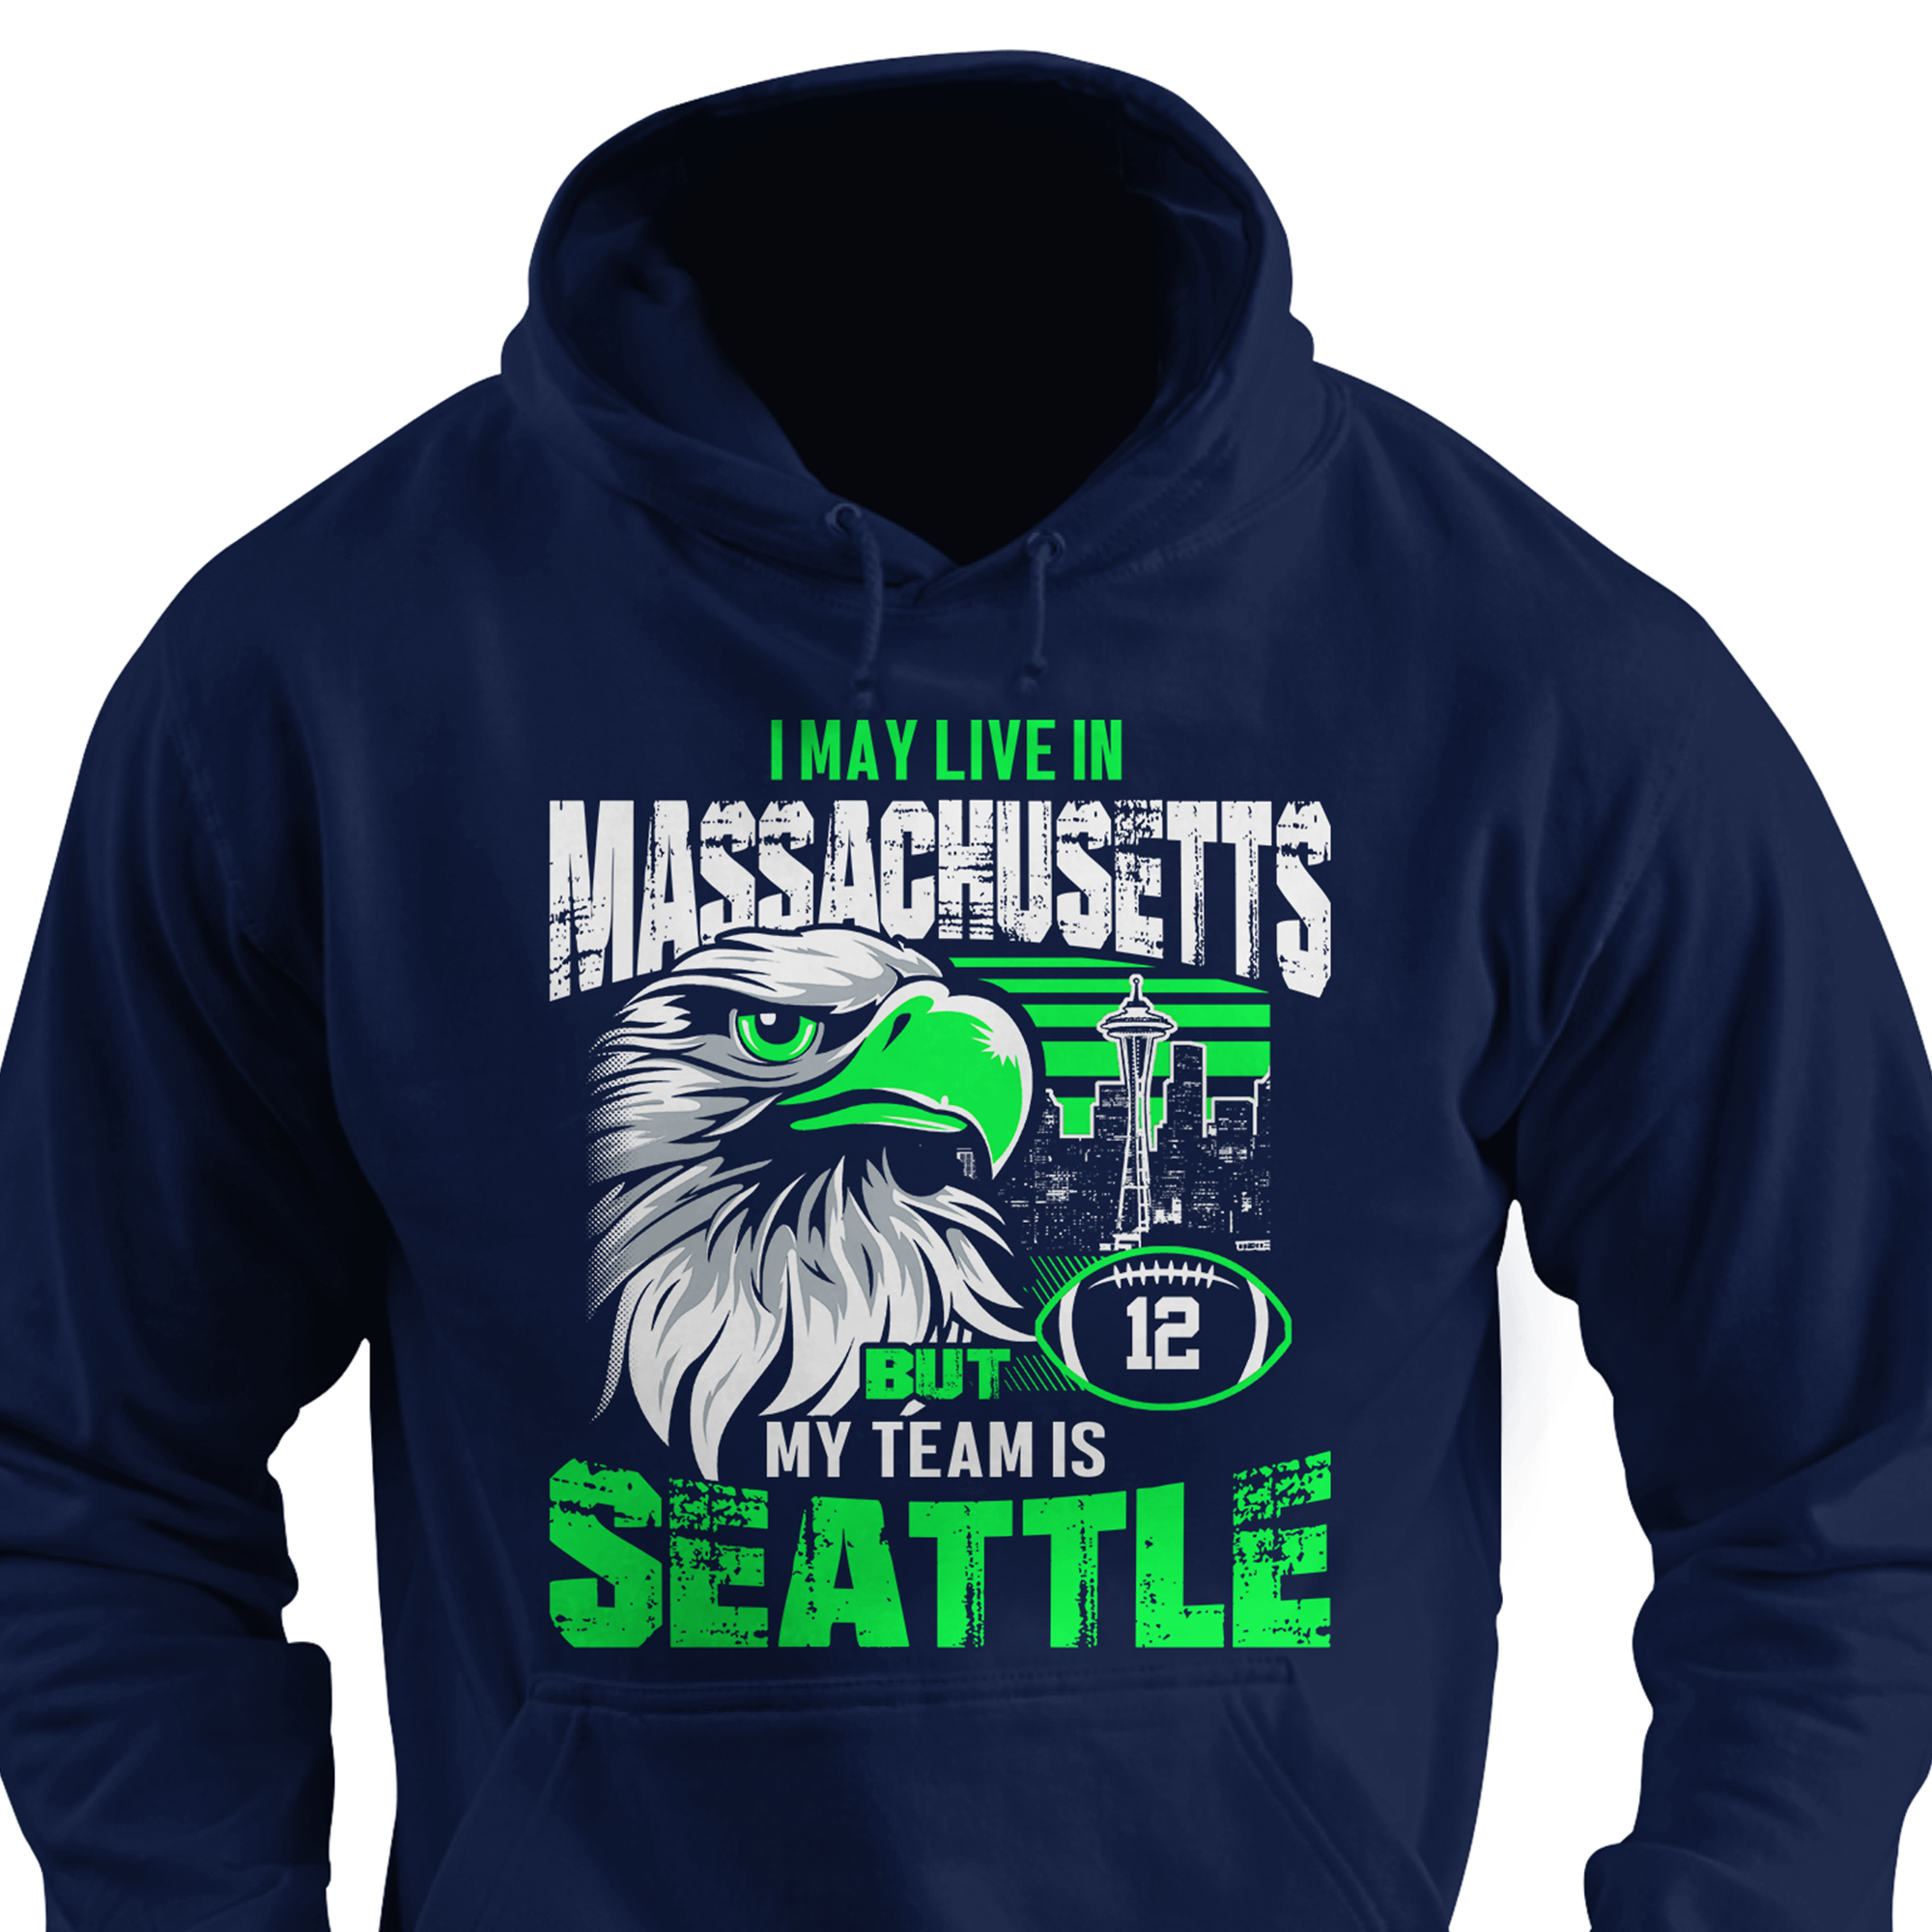 I may live in Massachusetts but my team is Seattle